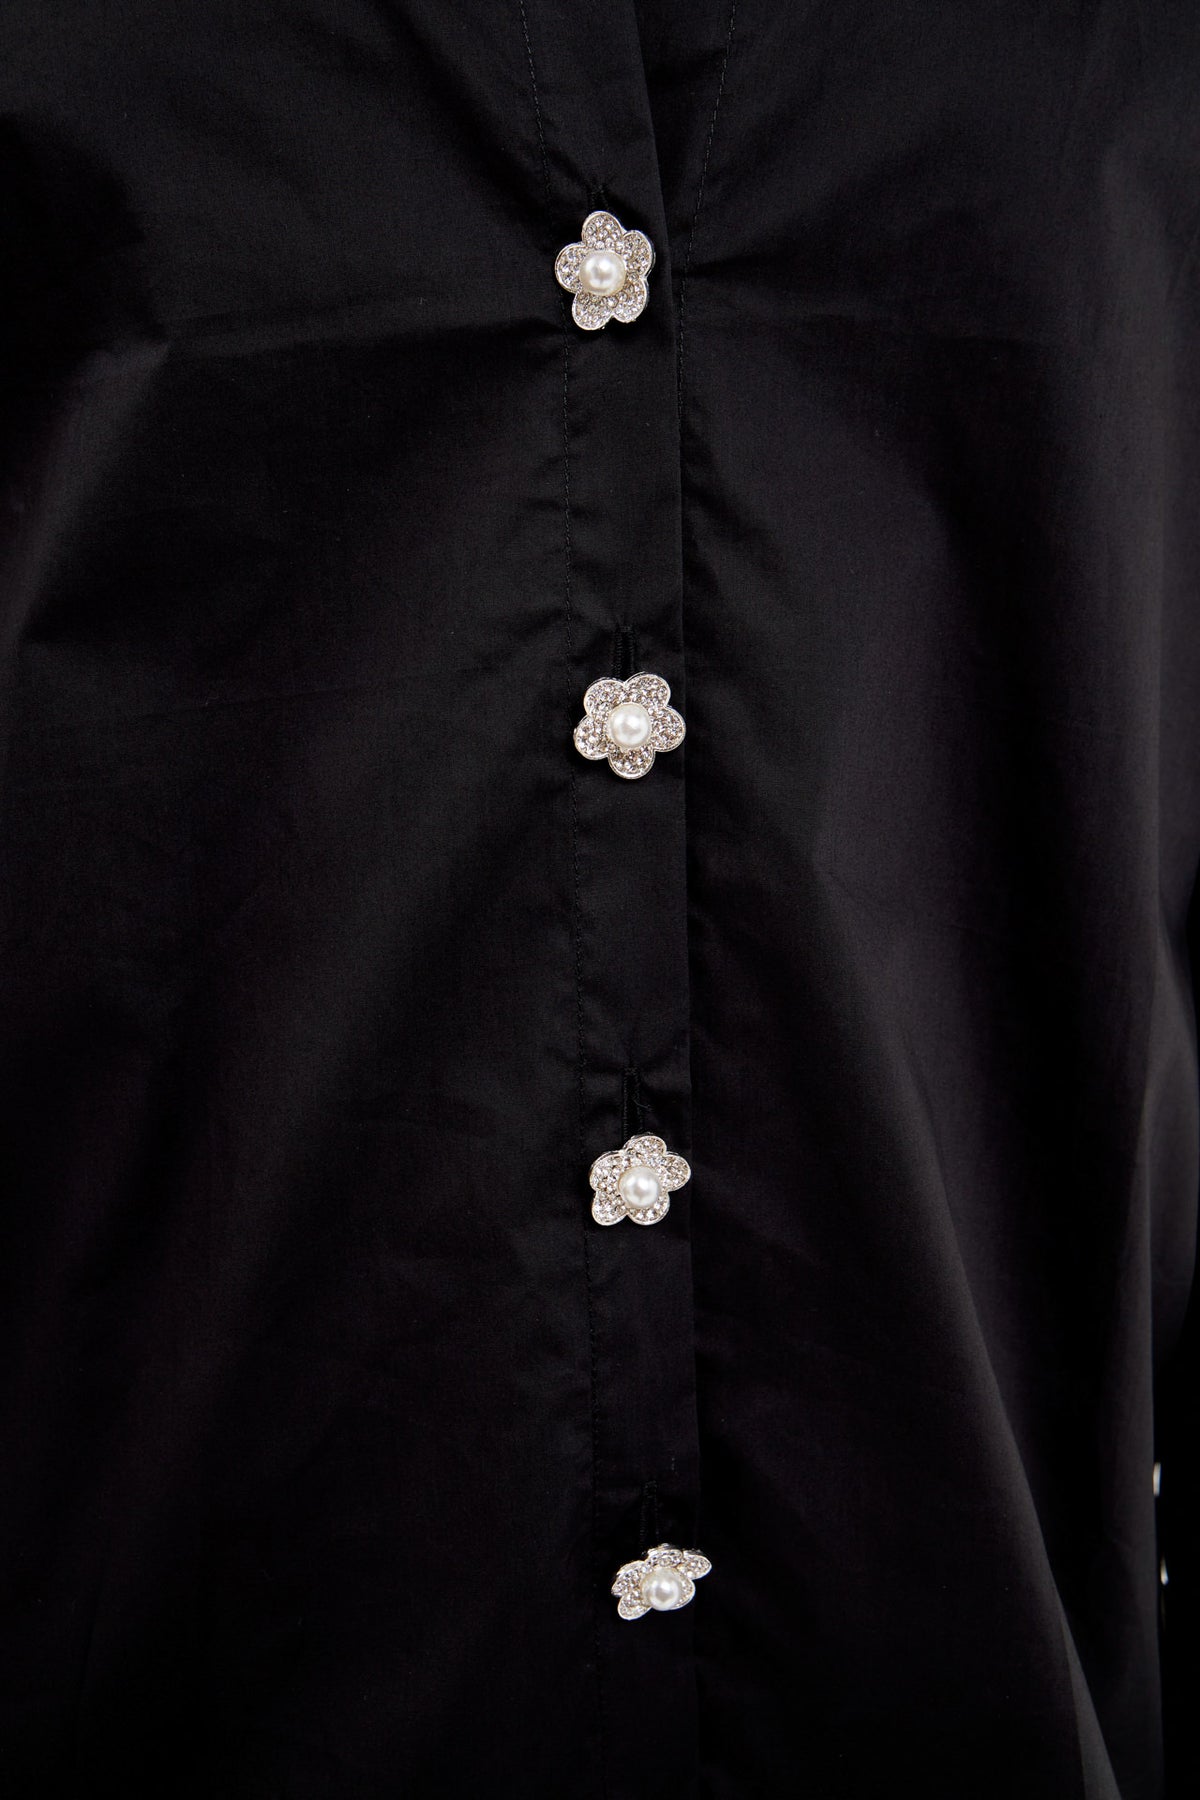 ENGLISH FACTORY - Oversized Collared Shirt - SHIRTS & BLOUSES available at Objectrare